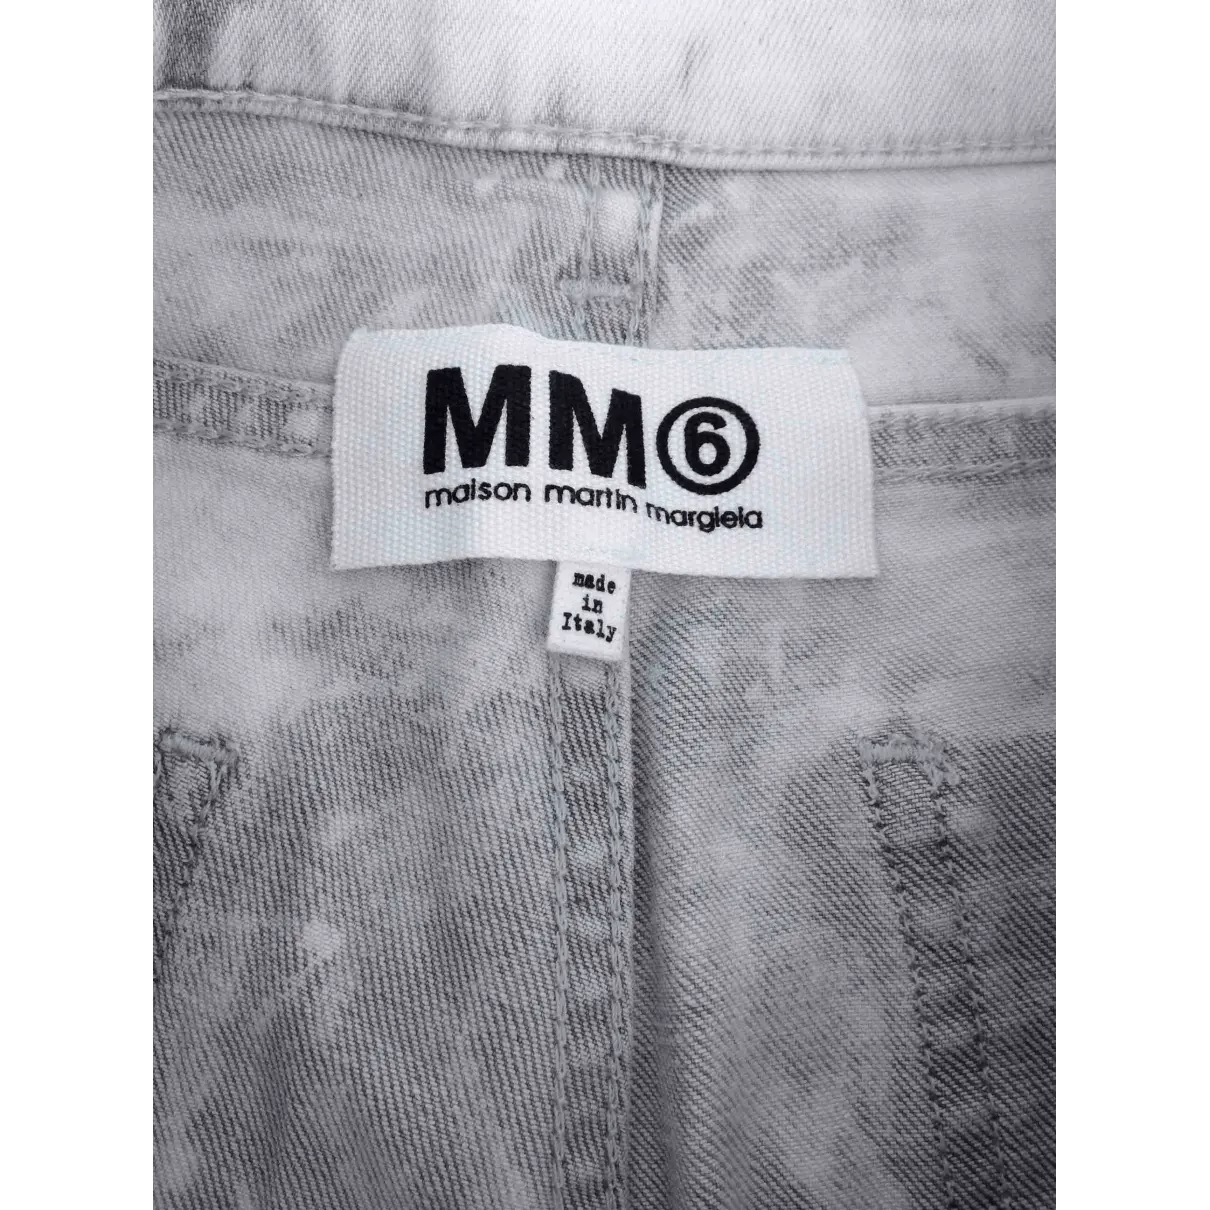 Buy MM6 Straight jeans online